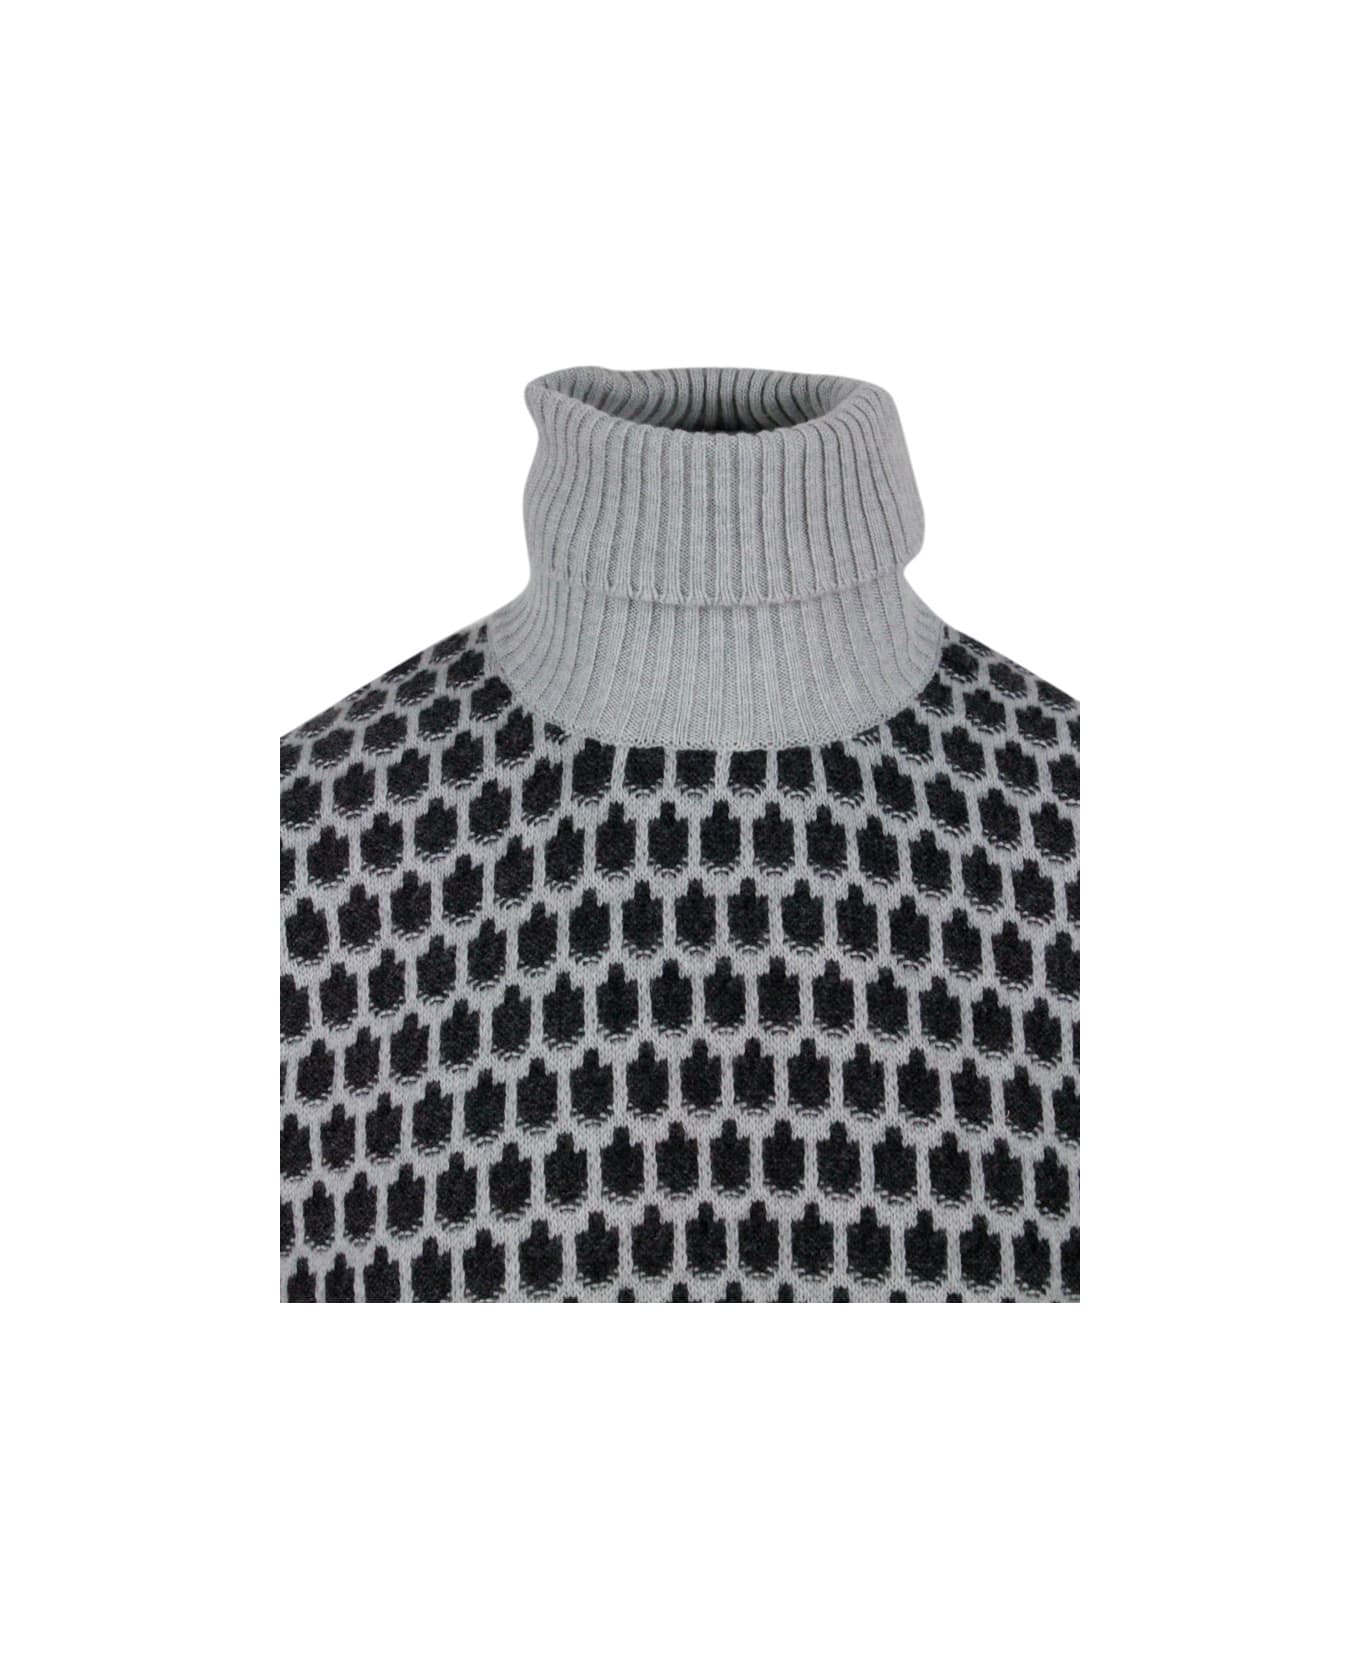 Kiton Long-sleeved Turtleneck Sweater In 100% Pure Cashmere Bicolor - Grey ニットウェア